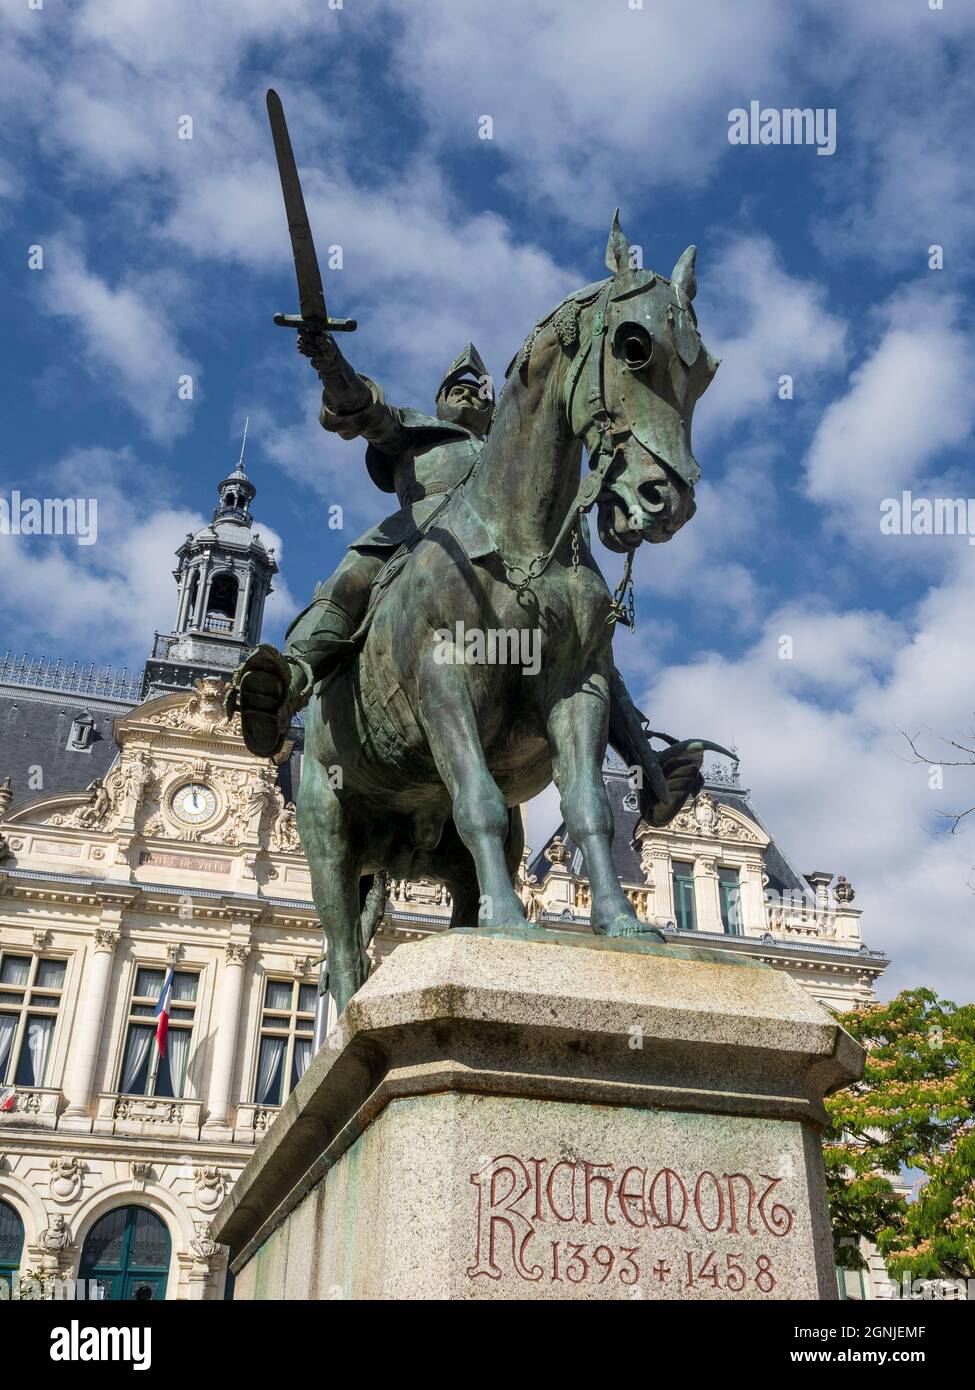 Equestrian statue of Arthur III of Brittany known as the “Constable of Richemont”, Vannes, Morbihan, Brittany, France. Stock Photo